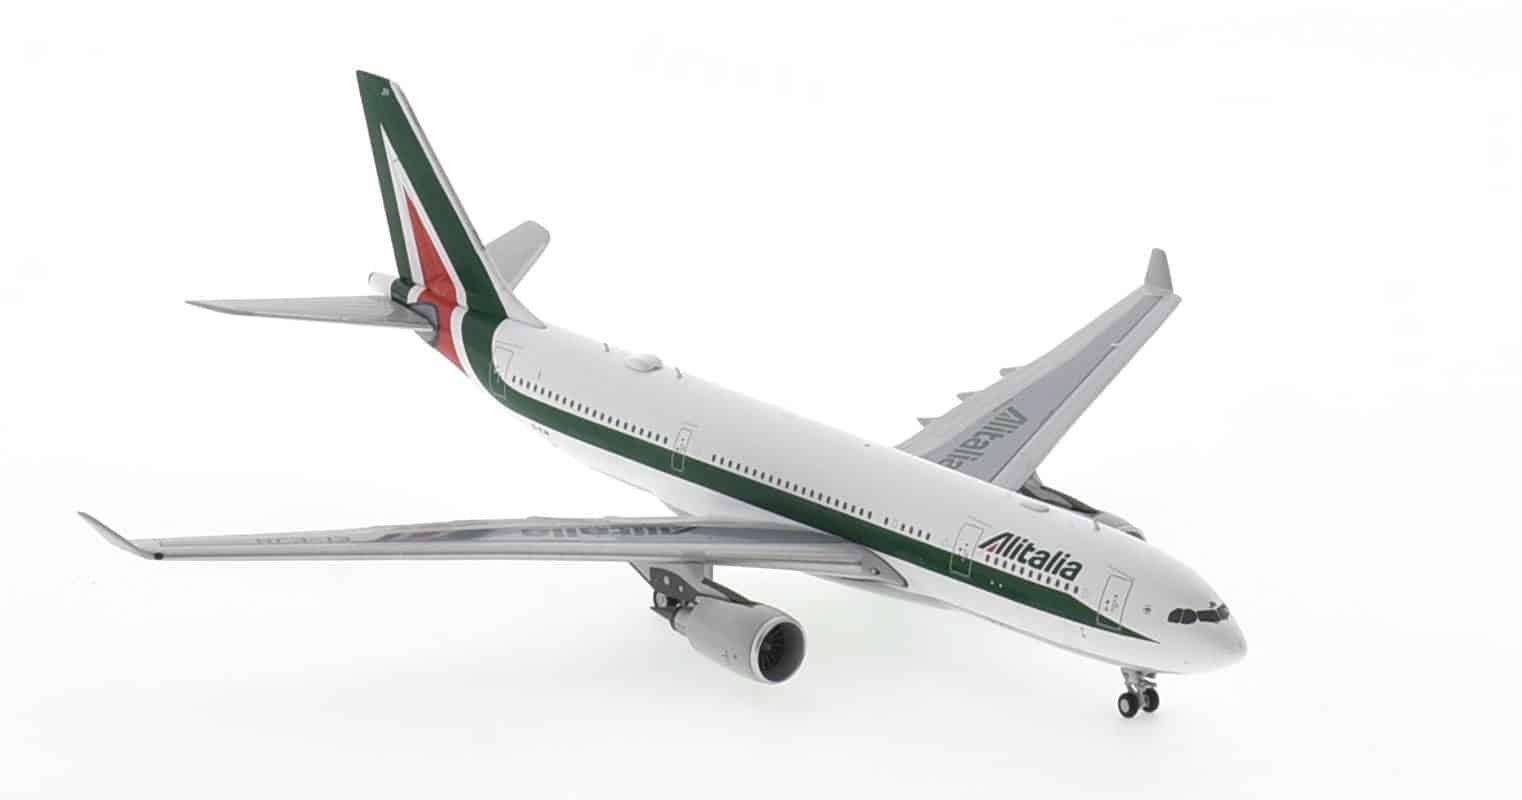 Front starboard side view of NG Models NG61036 - 1/400 scale diecast model of the Airbus A330-200 registration  EI-EJN, operator ITA Airways, Alitalia livery, circa late 2021.